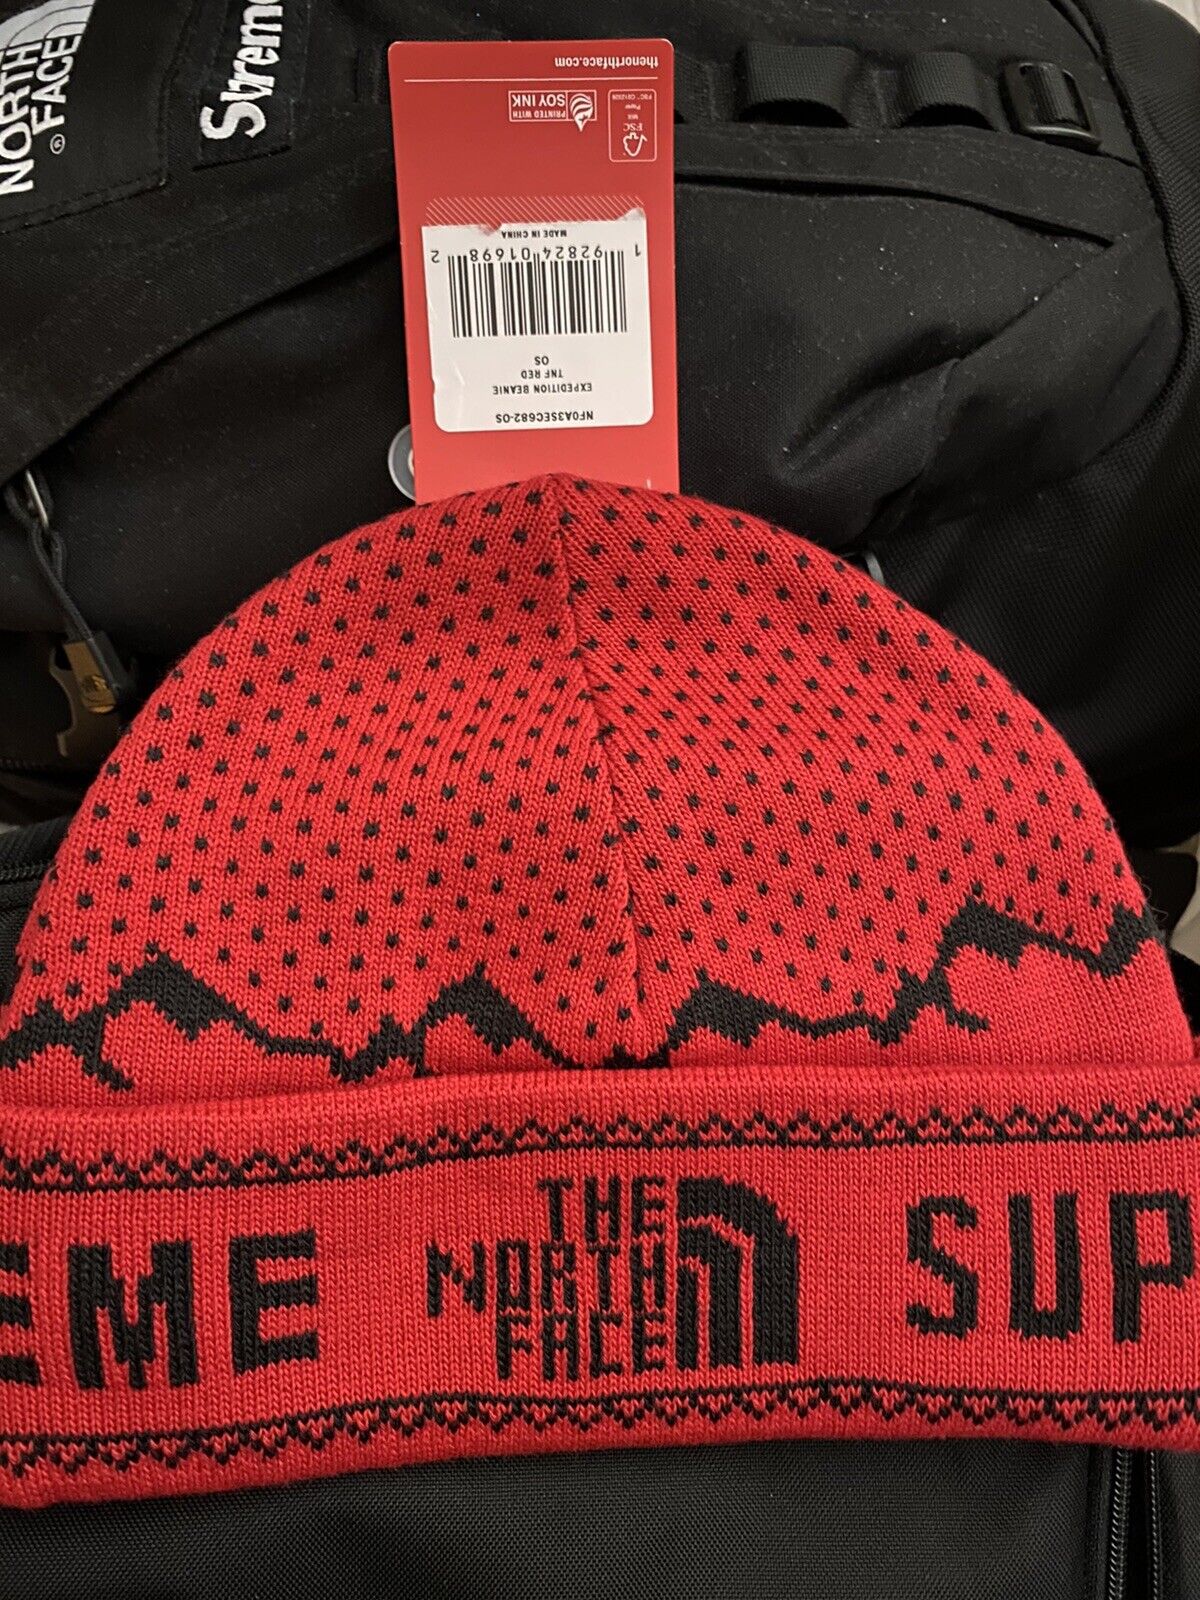 Supreme The NORTH FACE Fold Beanie Hat OS One Size FW18BN1 Red Black FW18